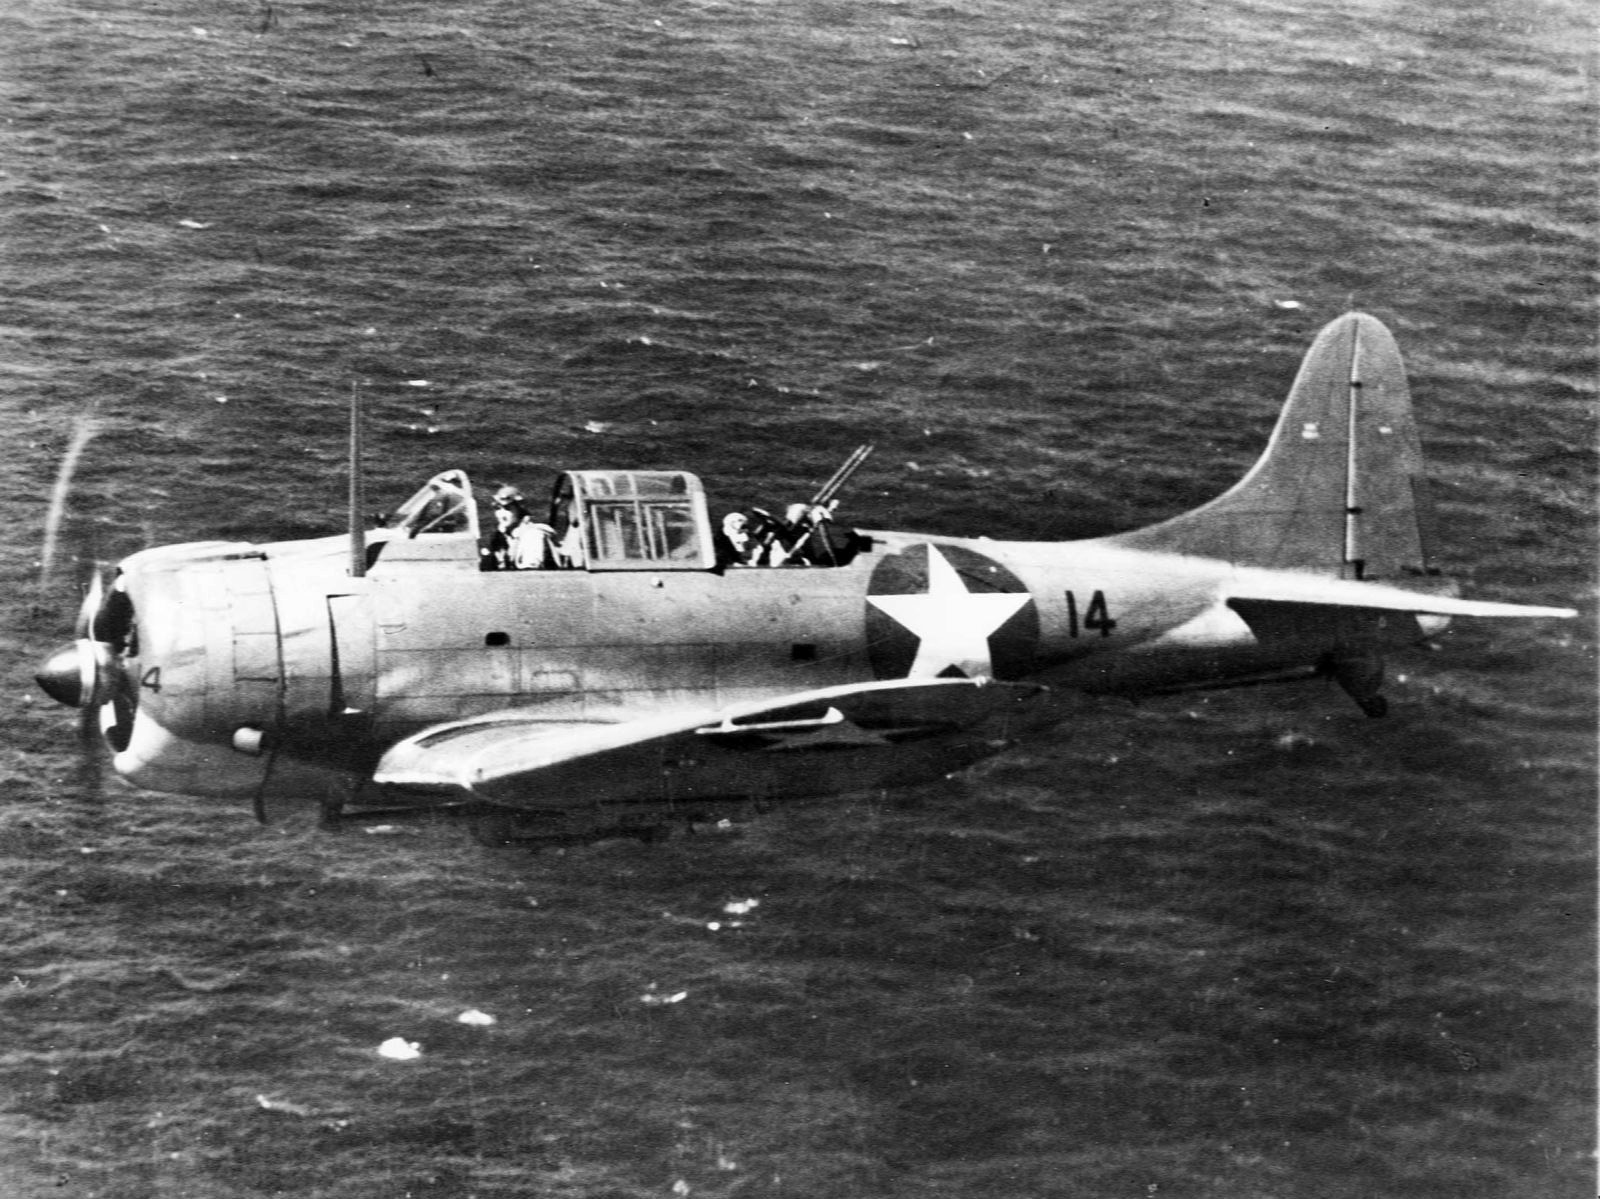 An SBD Dauntless scout bomber from Wasp flies patrol near Guadalcanal during the invasion there, August 1942.